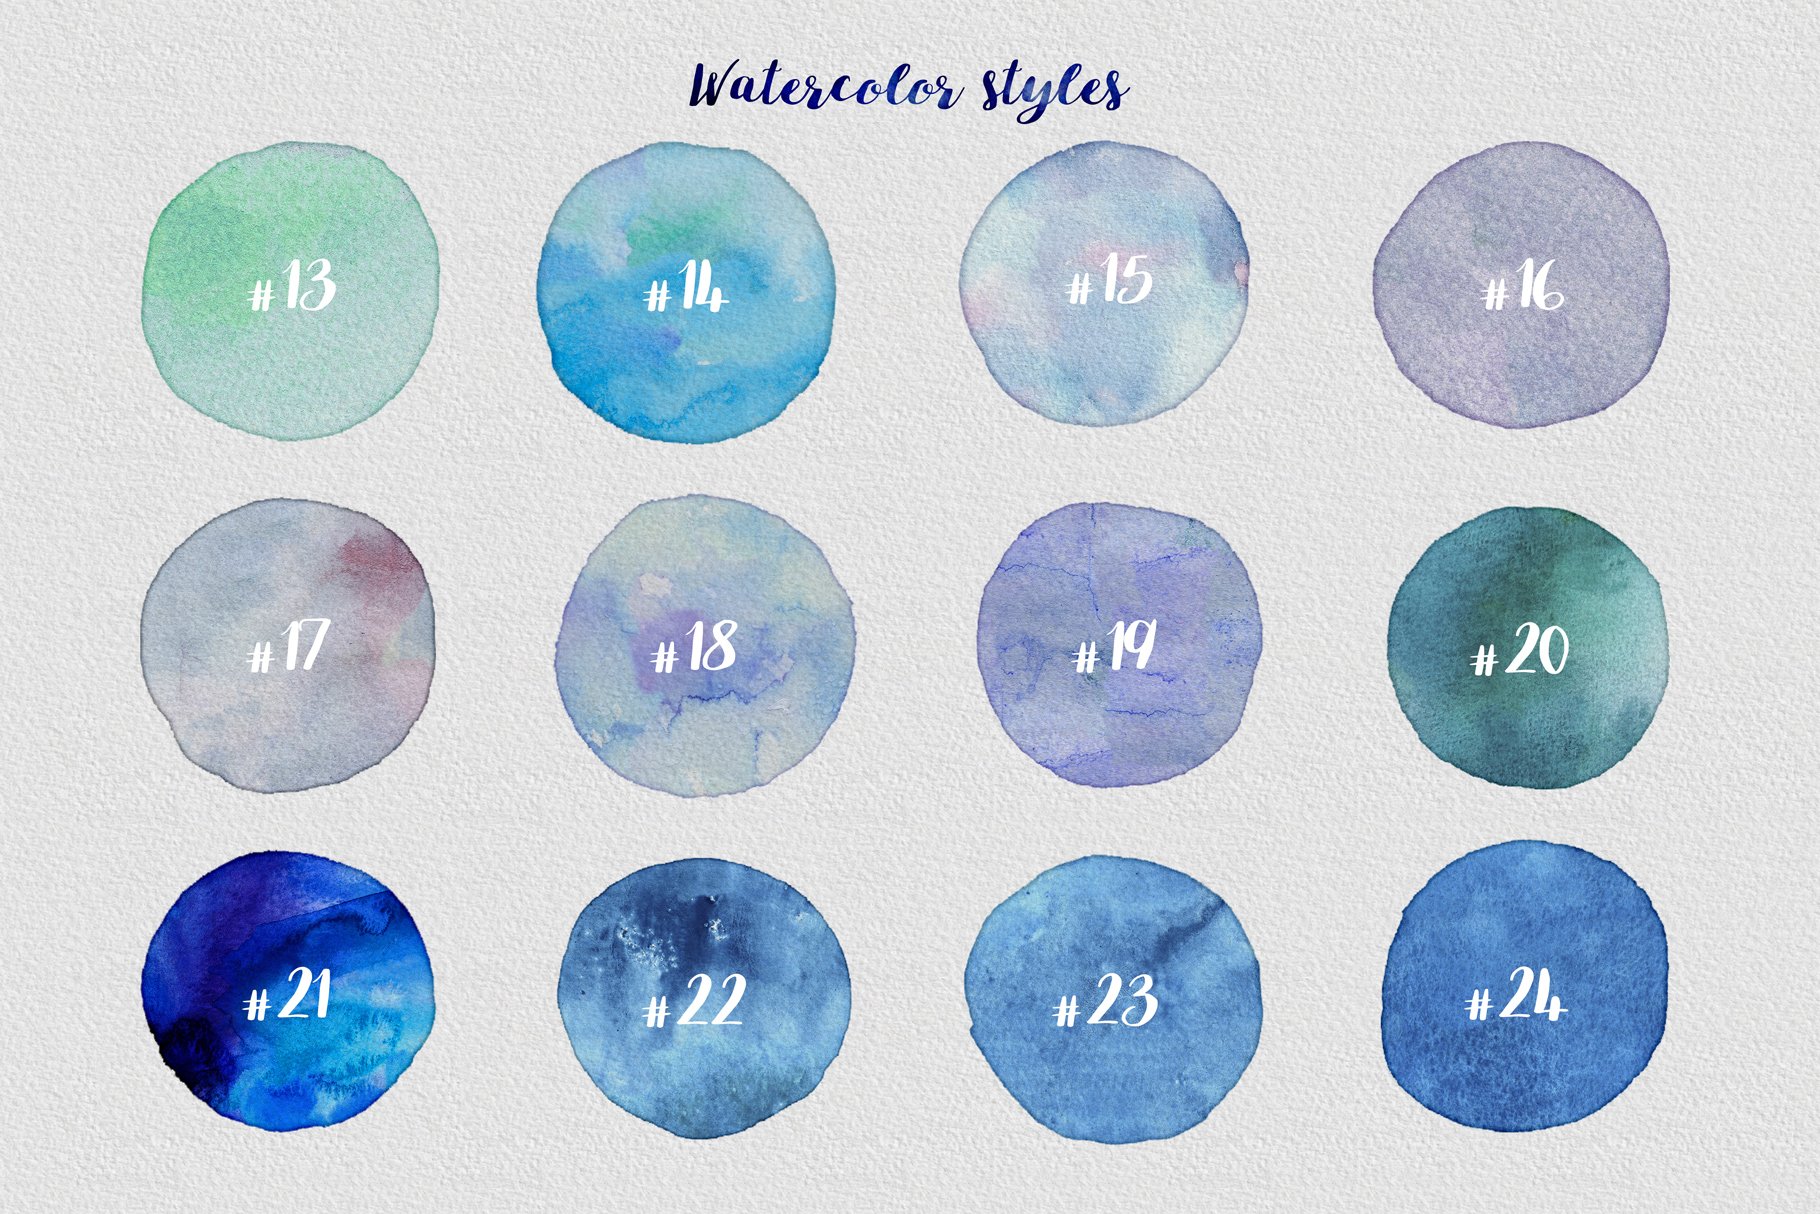 Watercolor Layer Effects For Adobe Photoshop